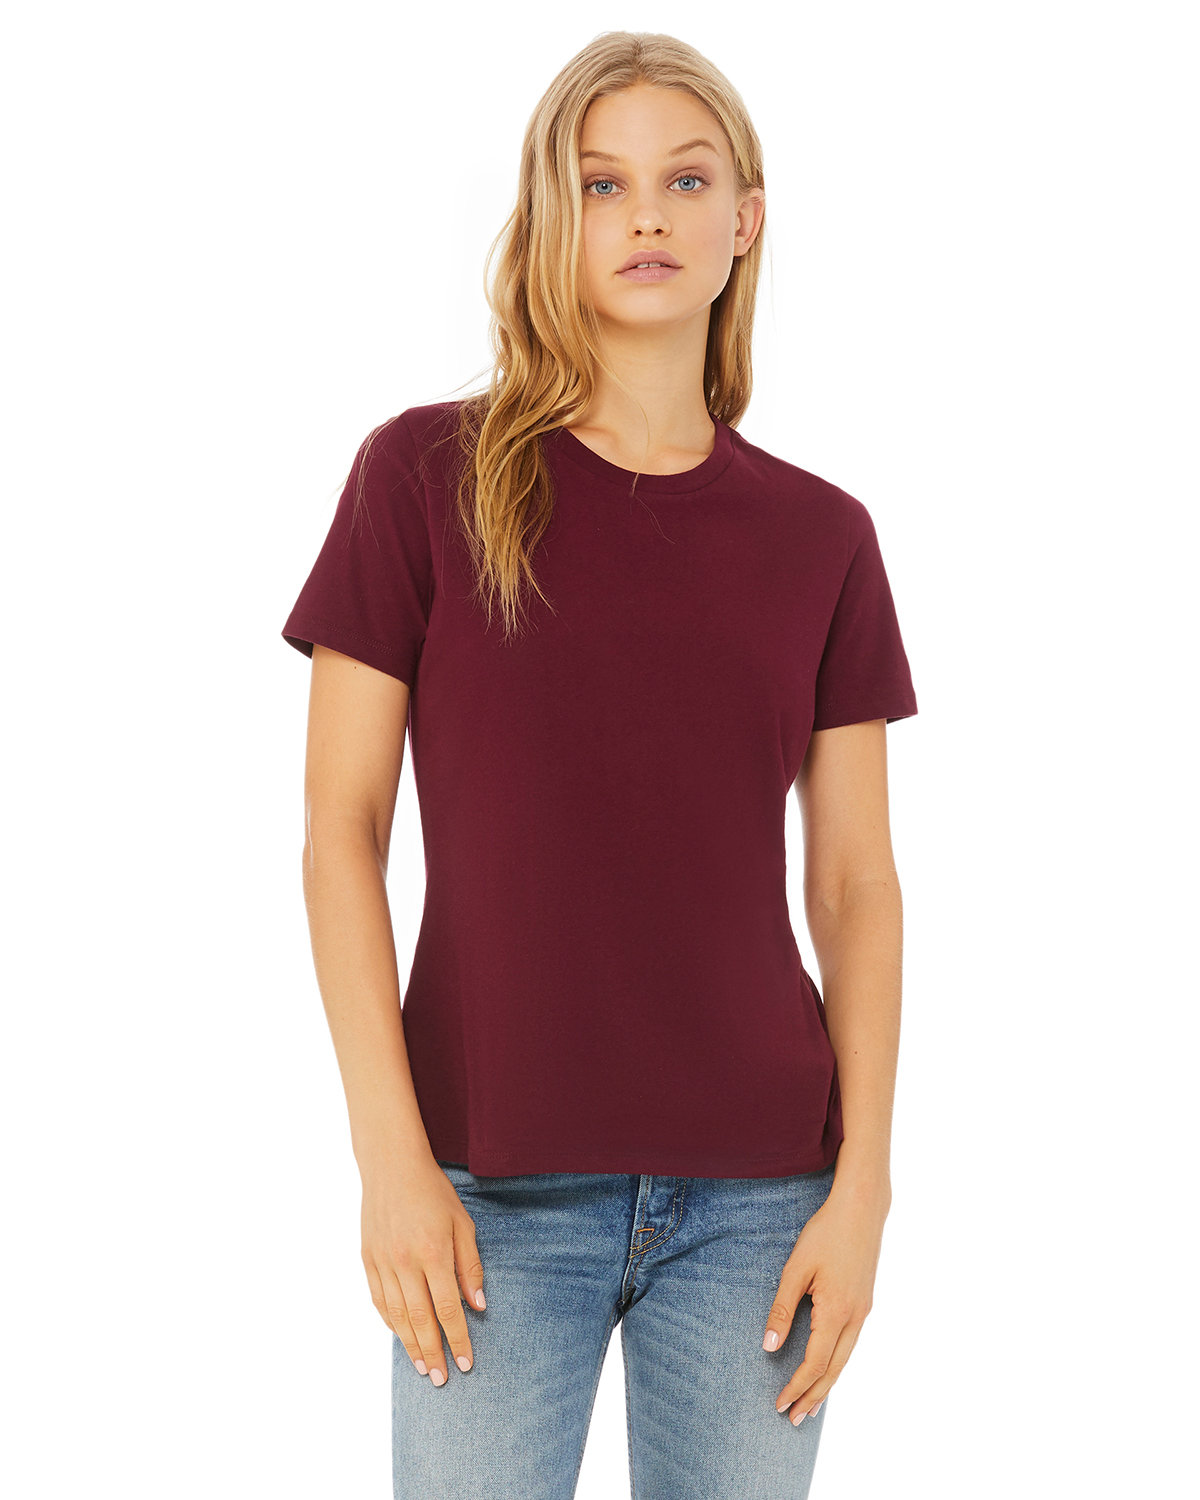 Branded Ladies’ Relaxed Jersey Short-Sleeve T-Shirt Leaf